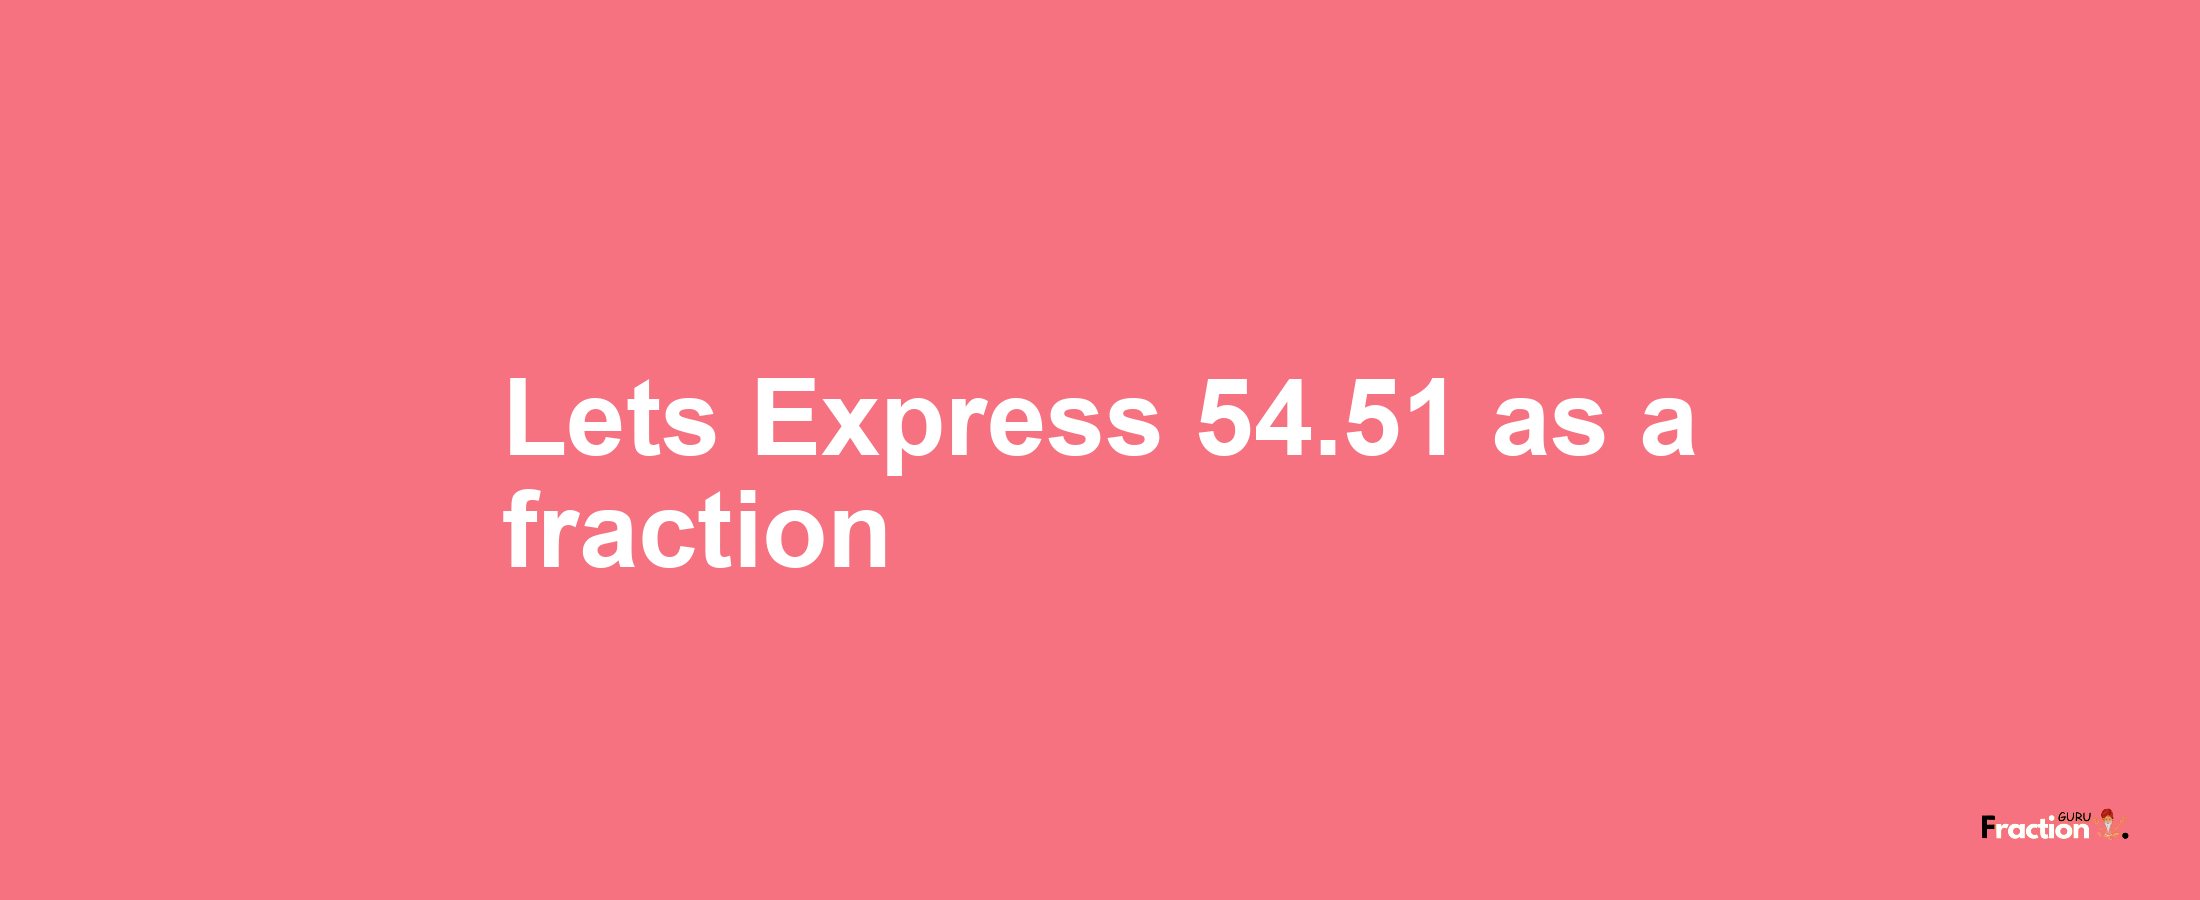 Lets Express 54.51 as afraction